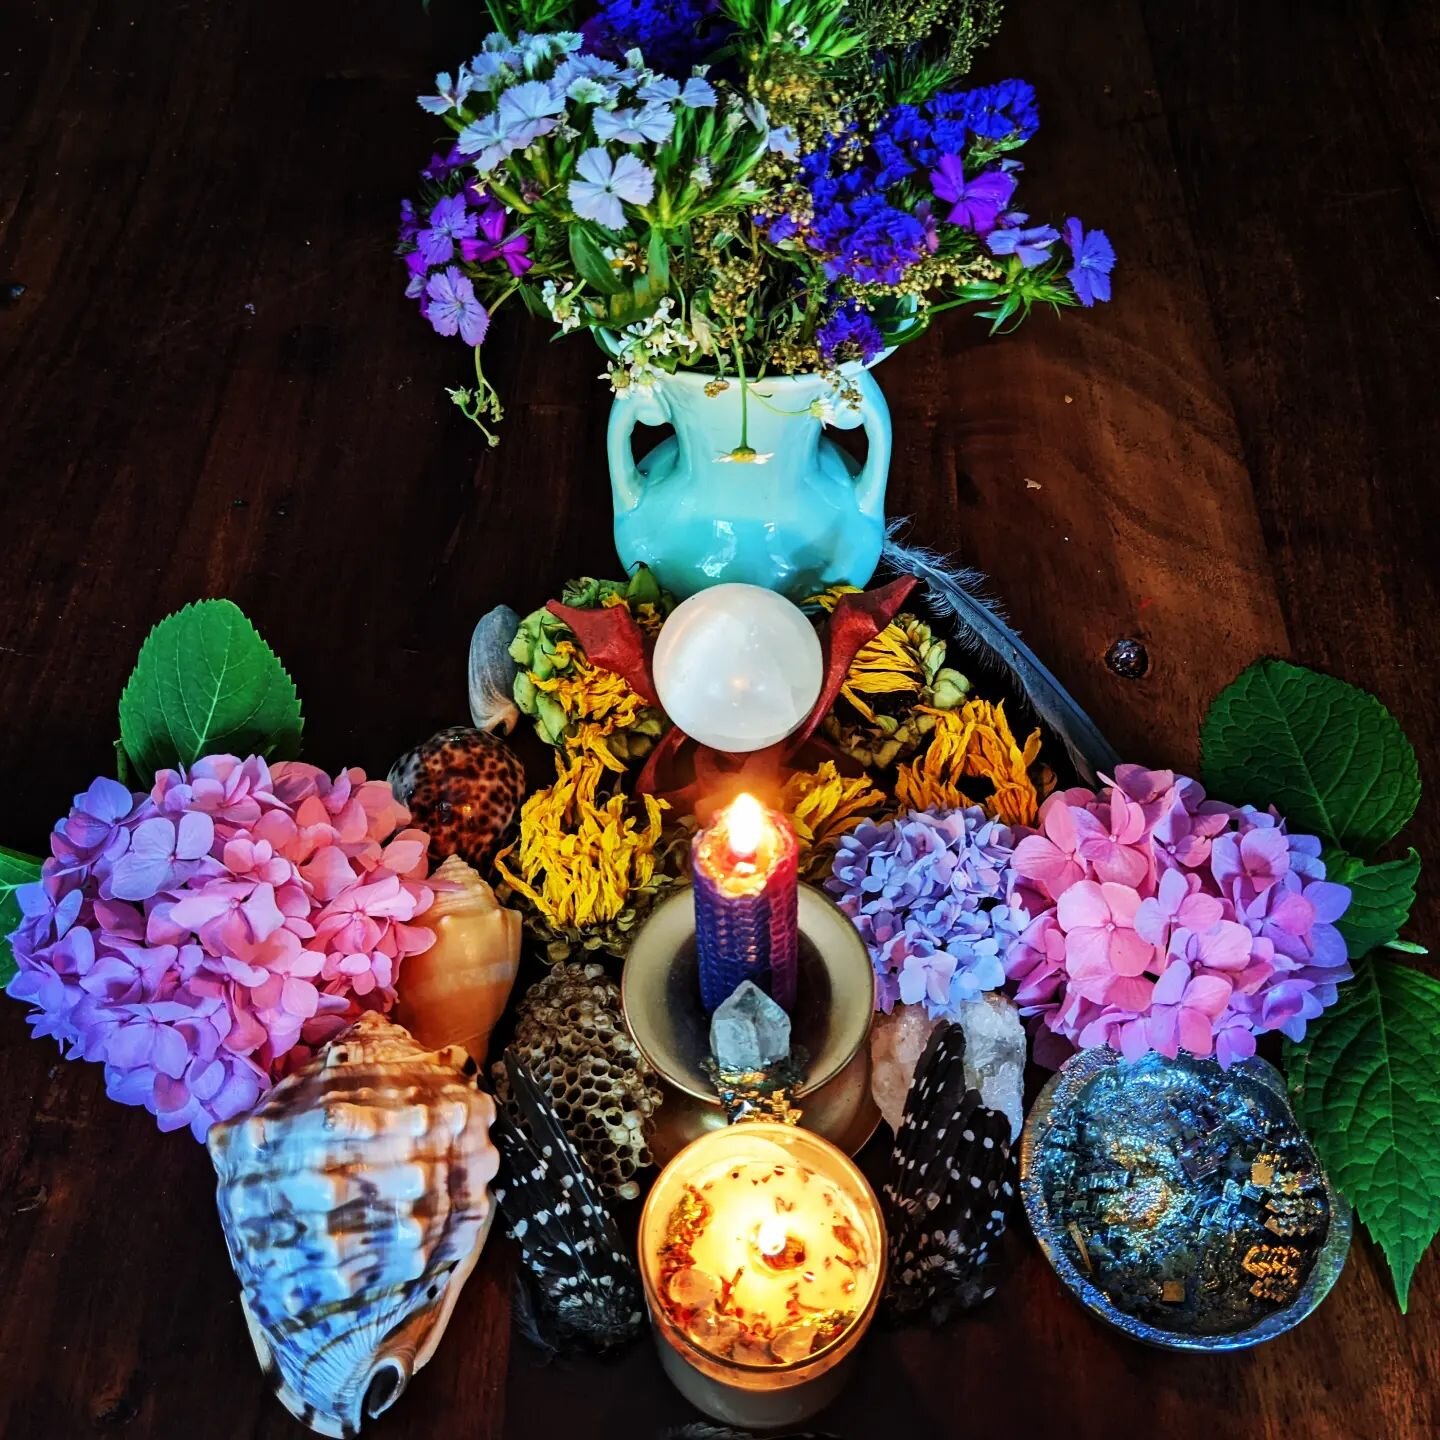 ✨🌝 Full Moon in Sagittarius Altar🌝✨

💐We receive exuberant abundance as it gallops toward us in a parade of optimism, reminding us of the promised flowers and fruits of radical imagination. 
✨What gifts can you open your hands and receive? What fa